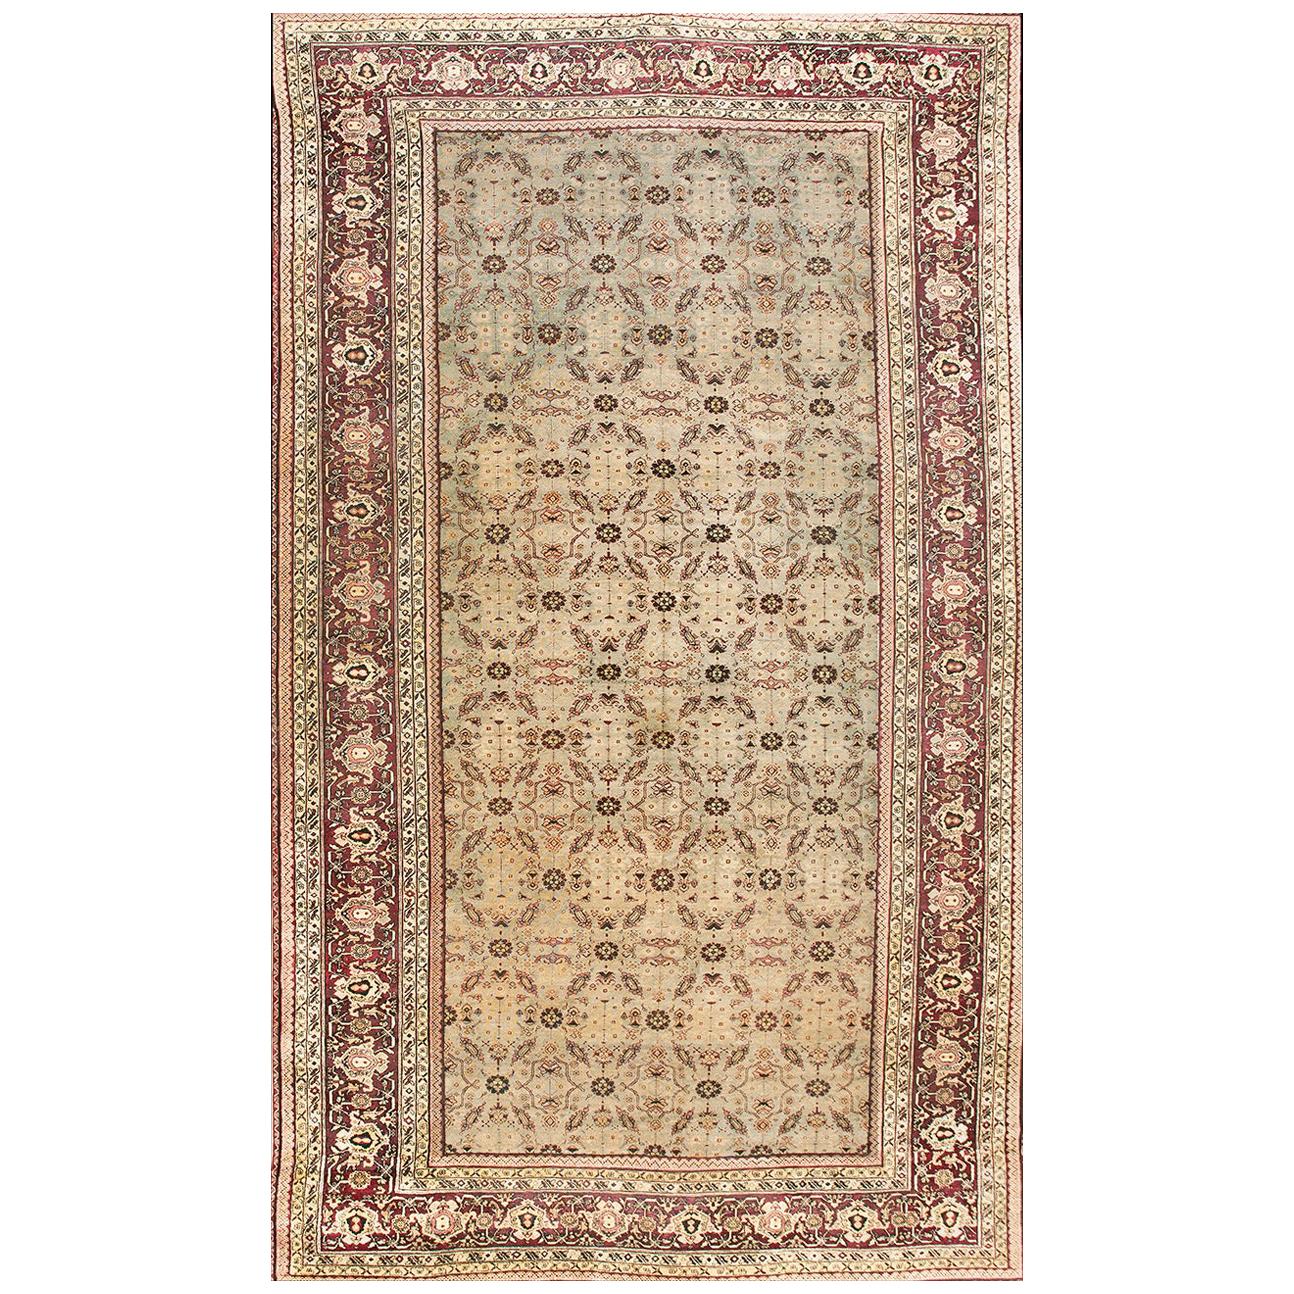 Late 19th Century Indian Agra Carpet ( 10'4" x 18'3" - 315 x 556 ) For Sale